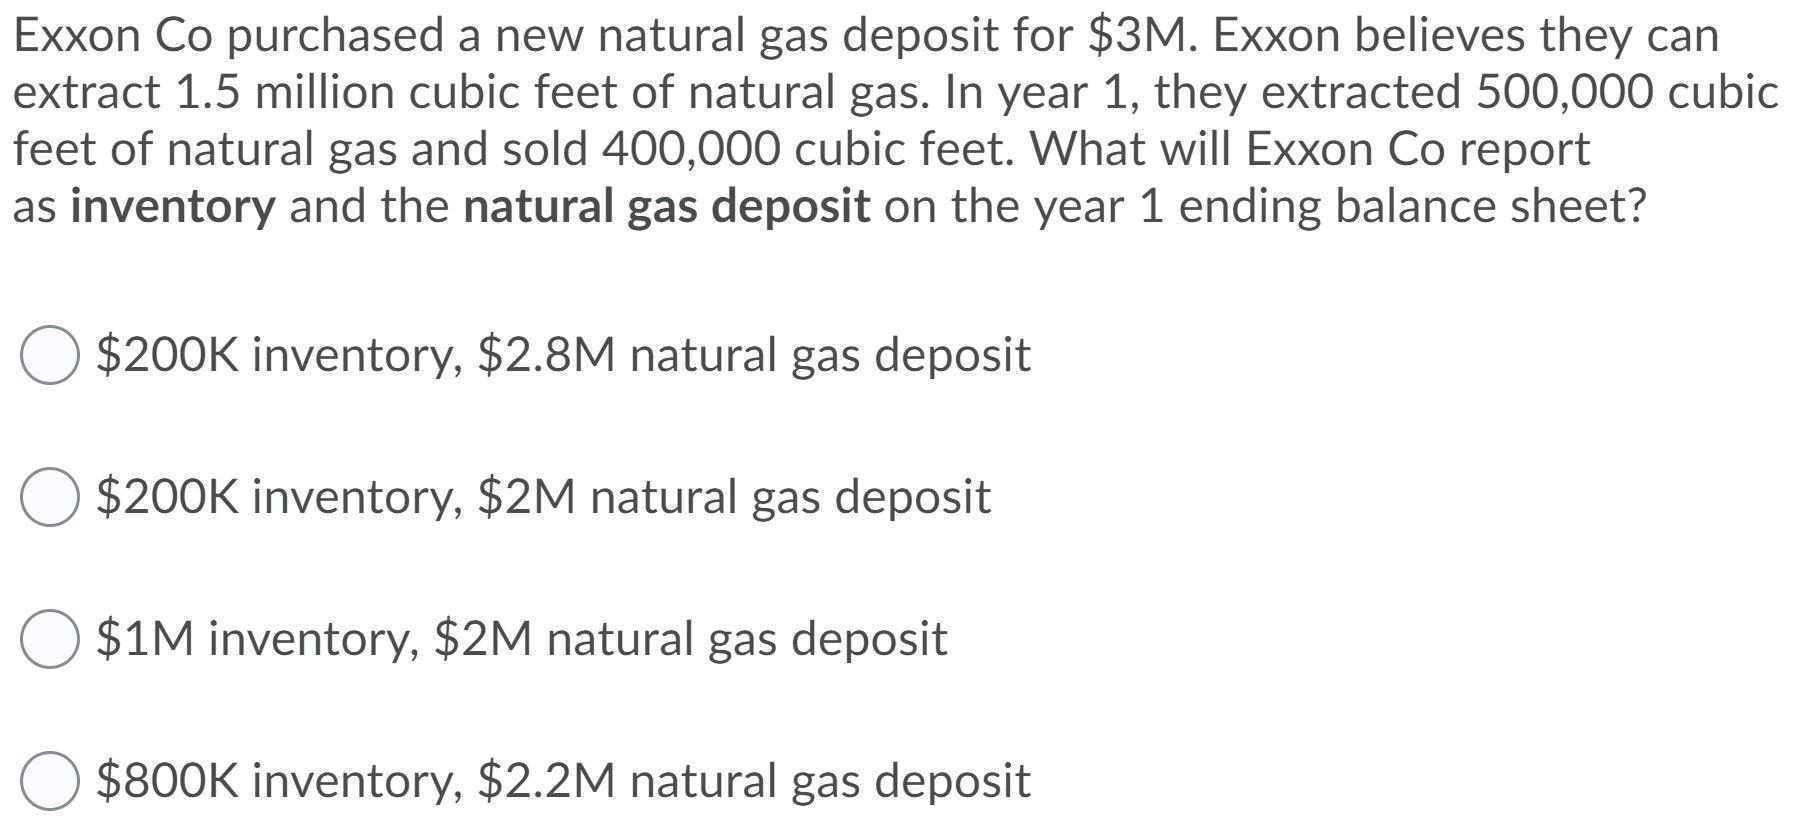 Exxon Co purchased a new natural gas deposit for $3M. Exxon believes they can extract 1.5 million cubic feet of natural gas.